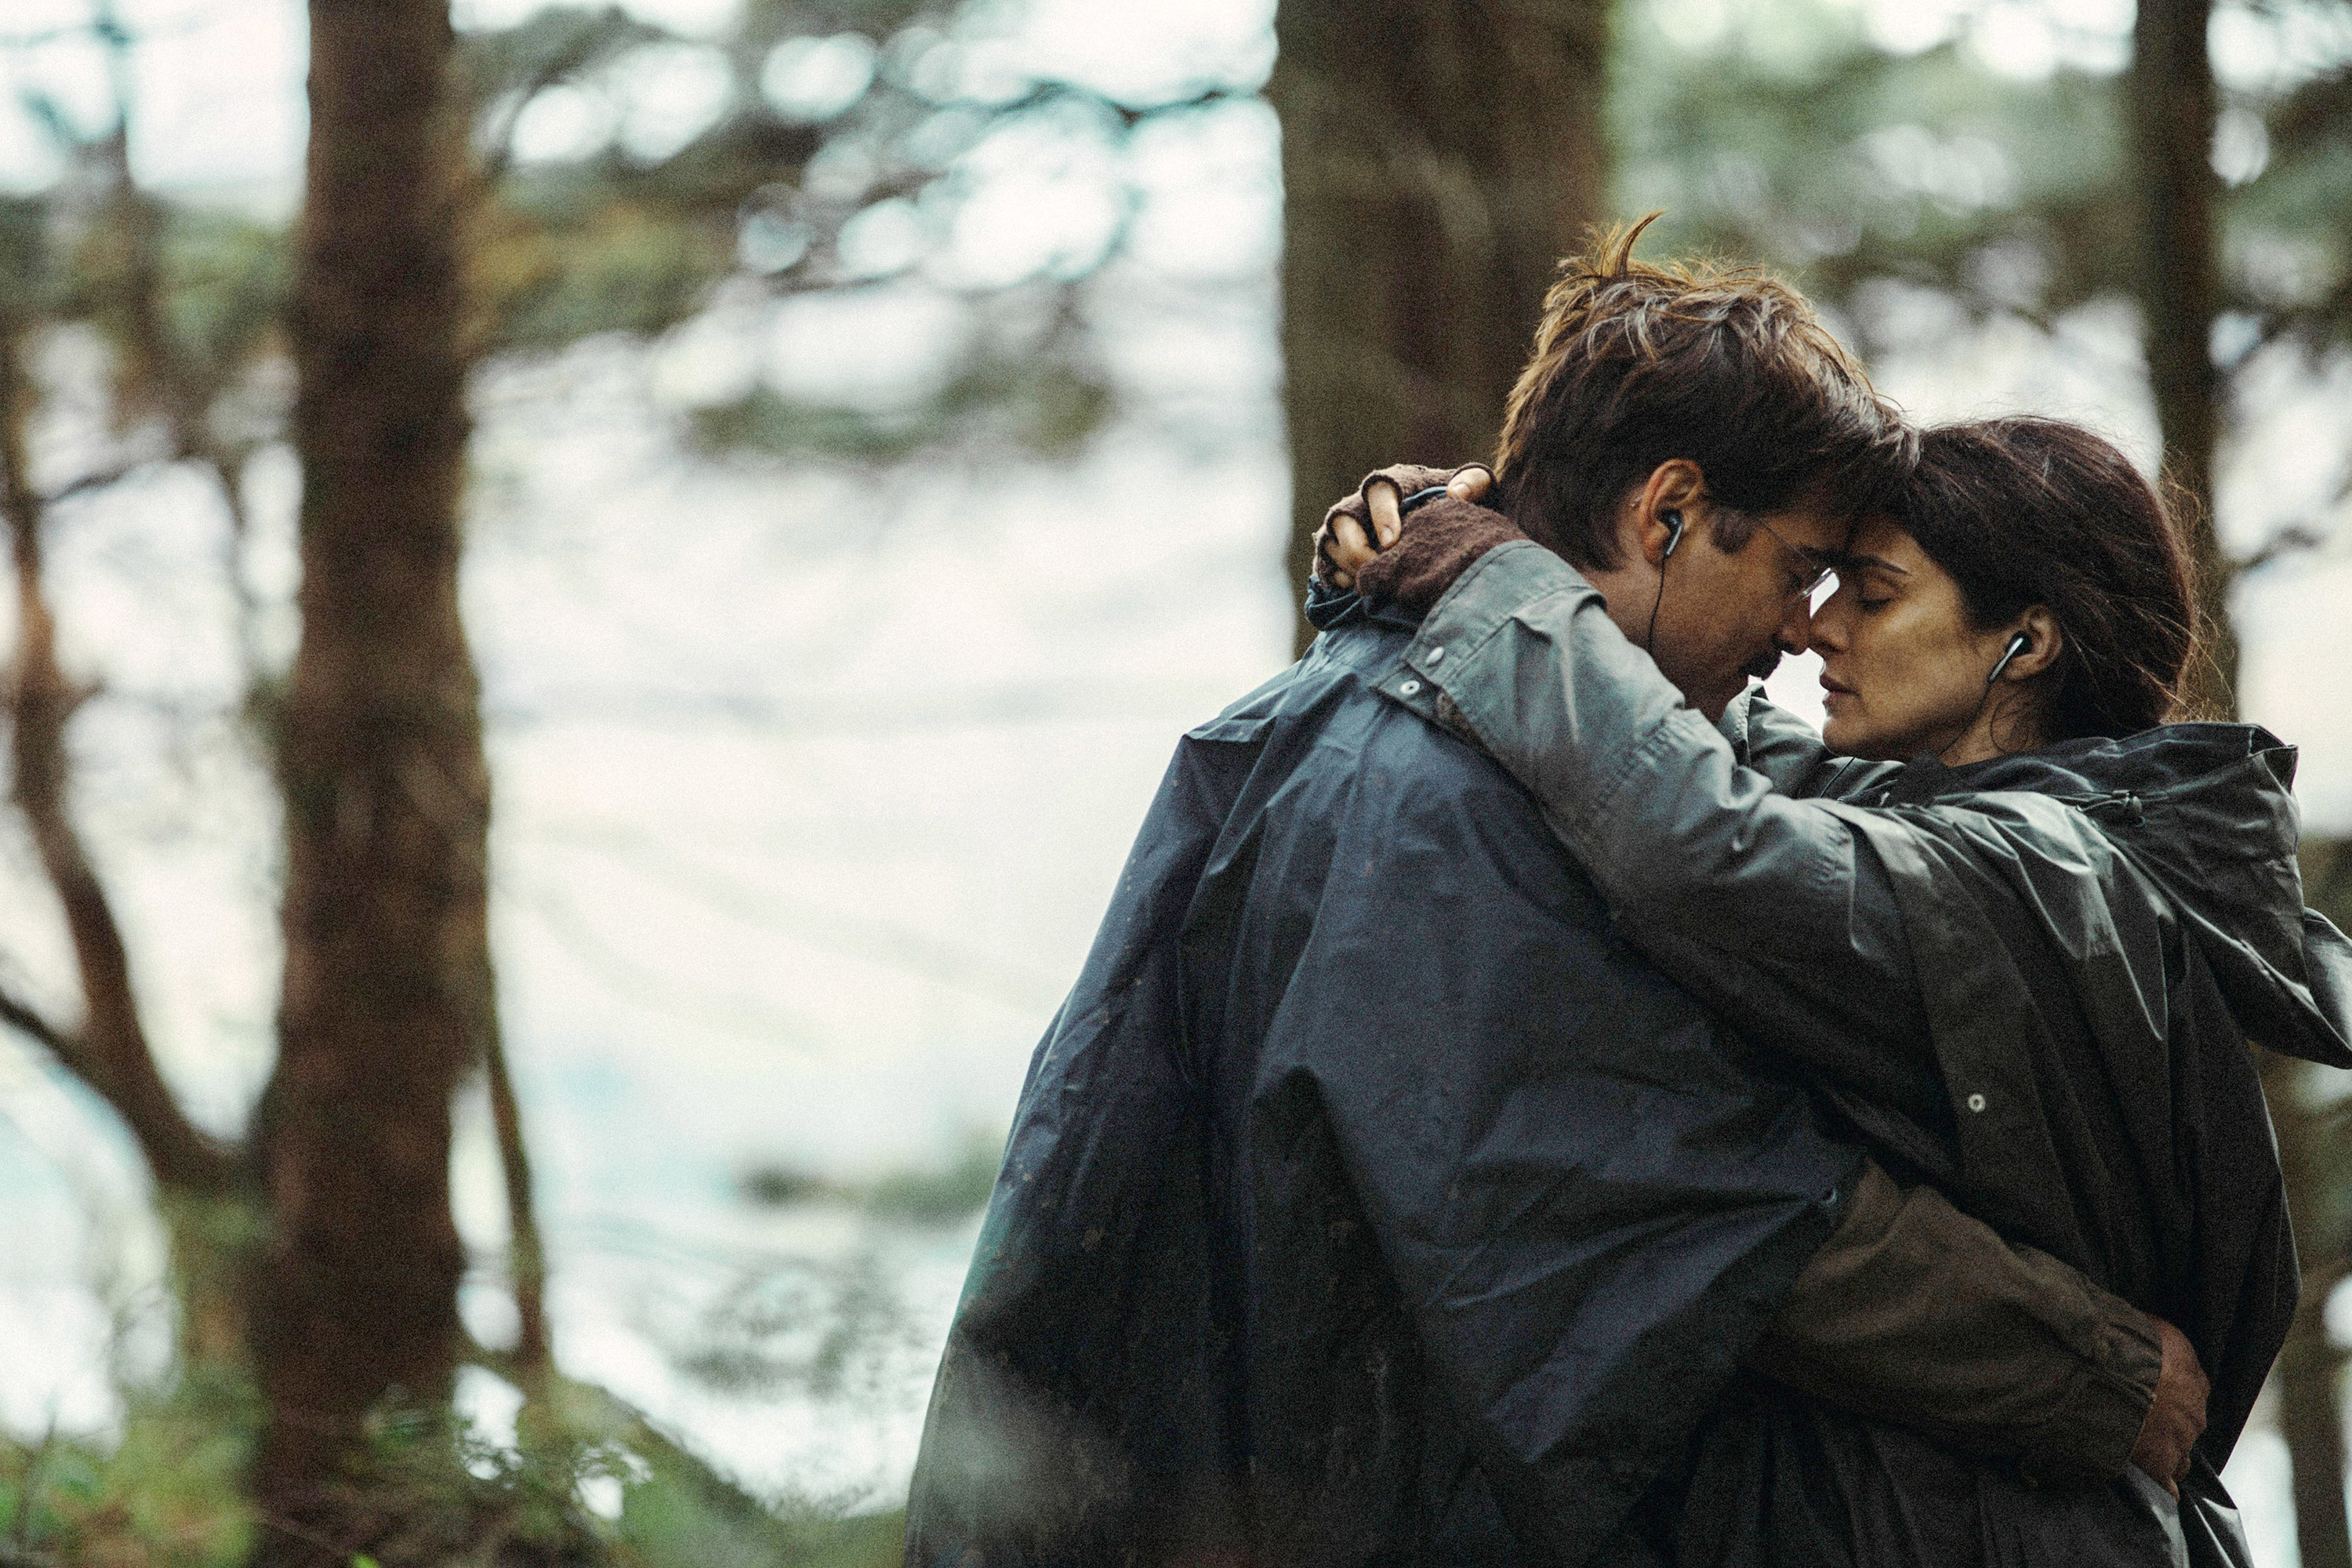 Colin Farrell and Rachel Weisz embrace in the woods